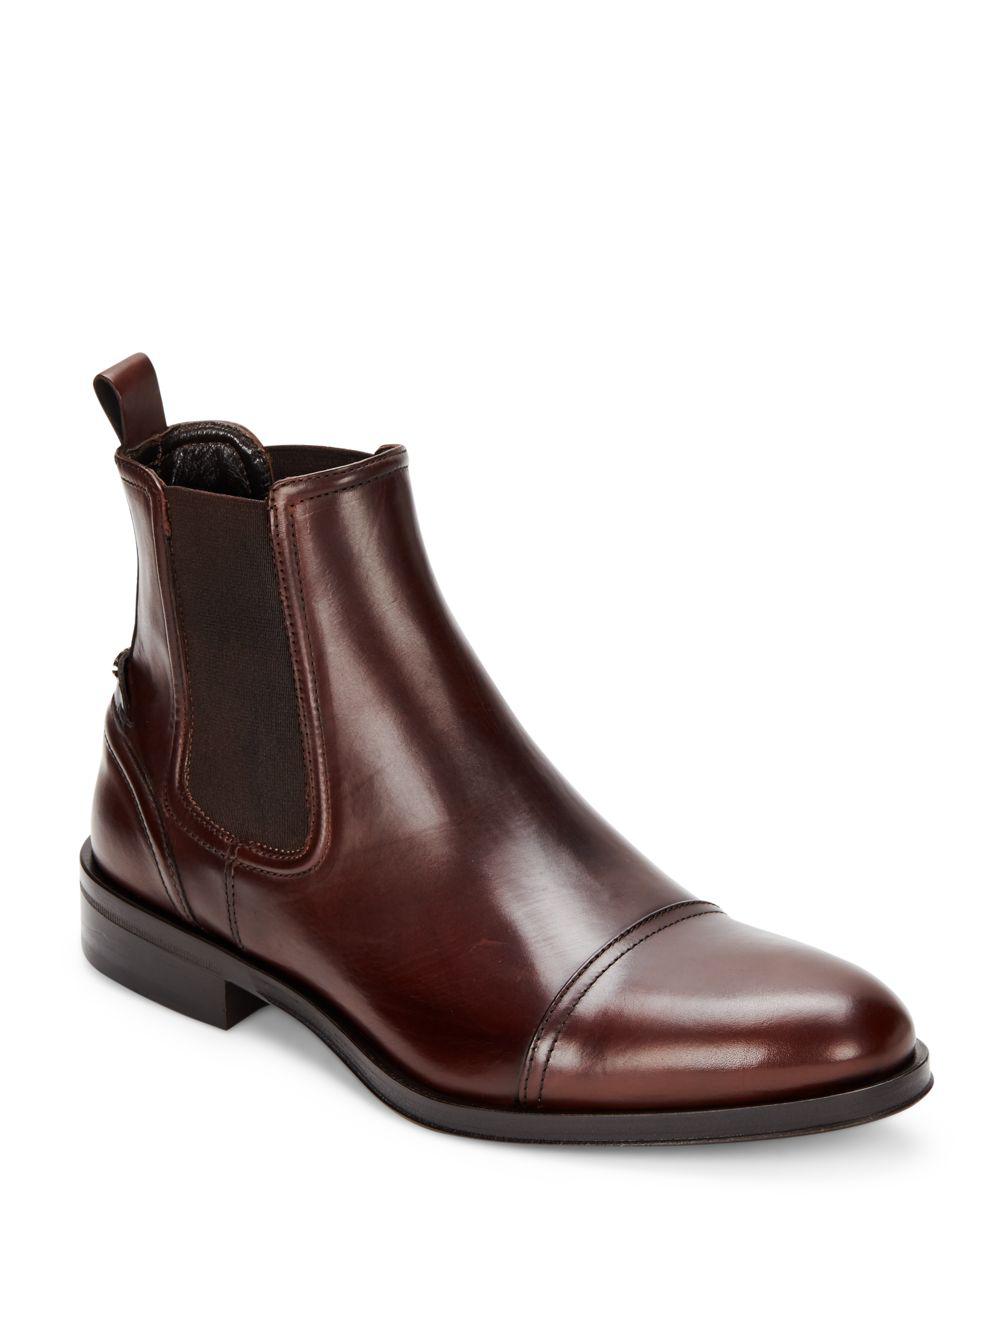 Roberto Cavalli Leather Chelsea Boots in Brown for Men - Save 18% - Lyst